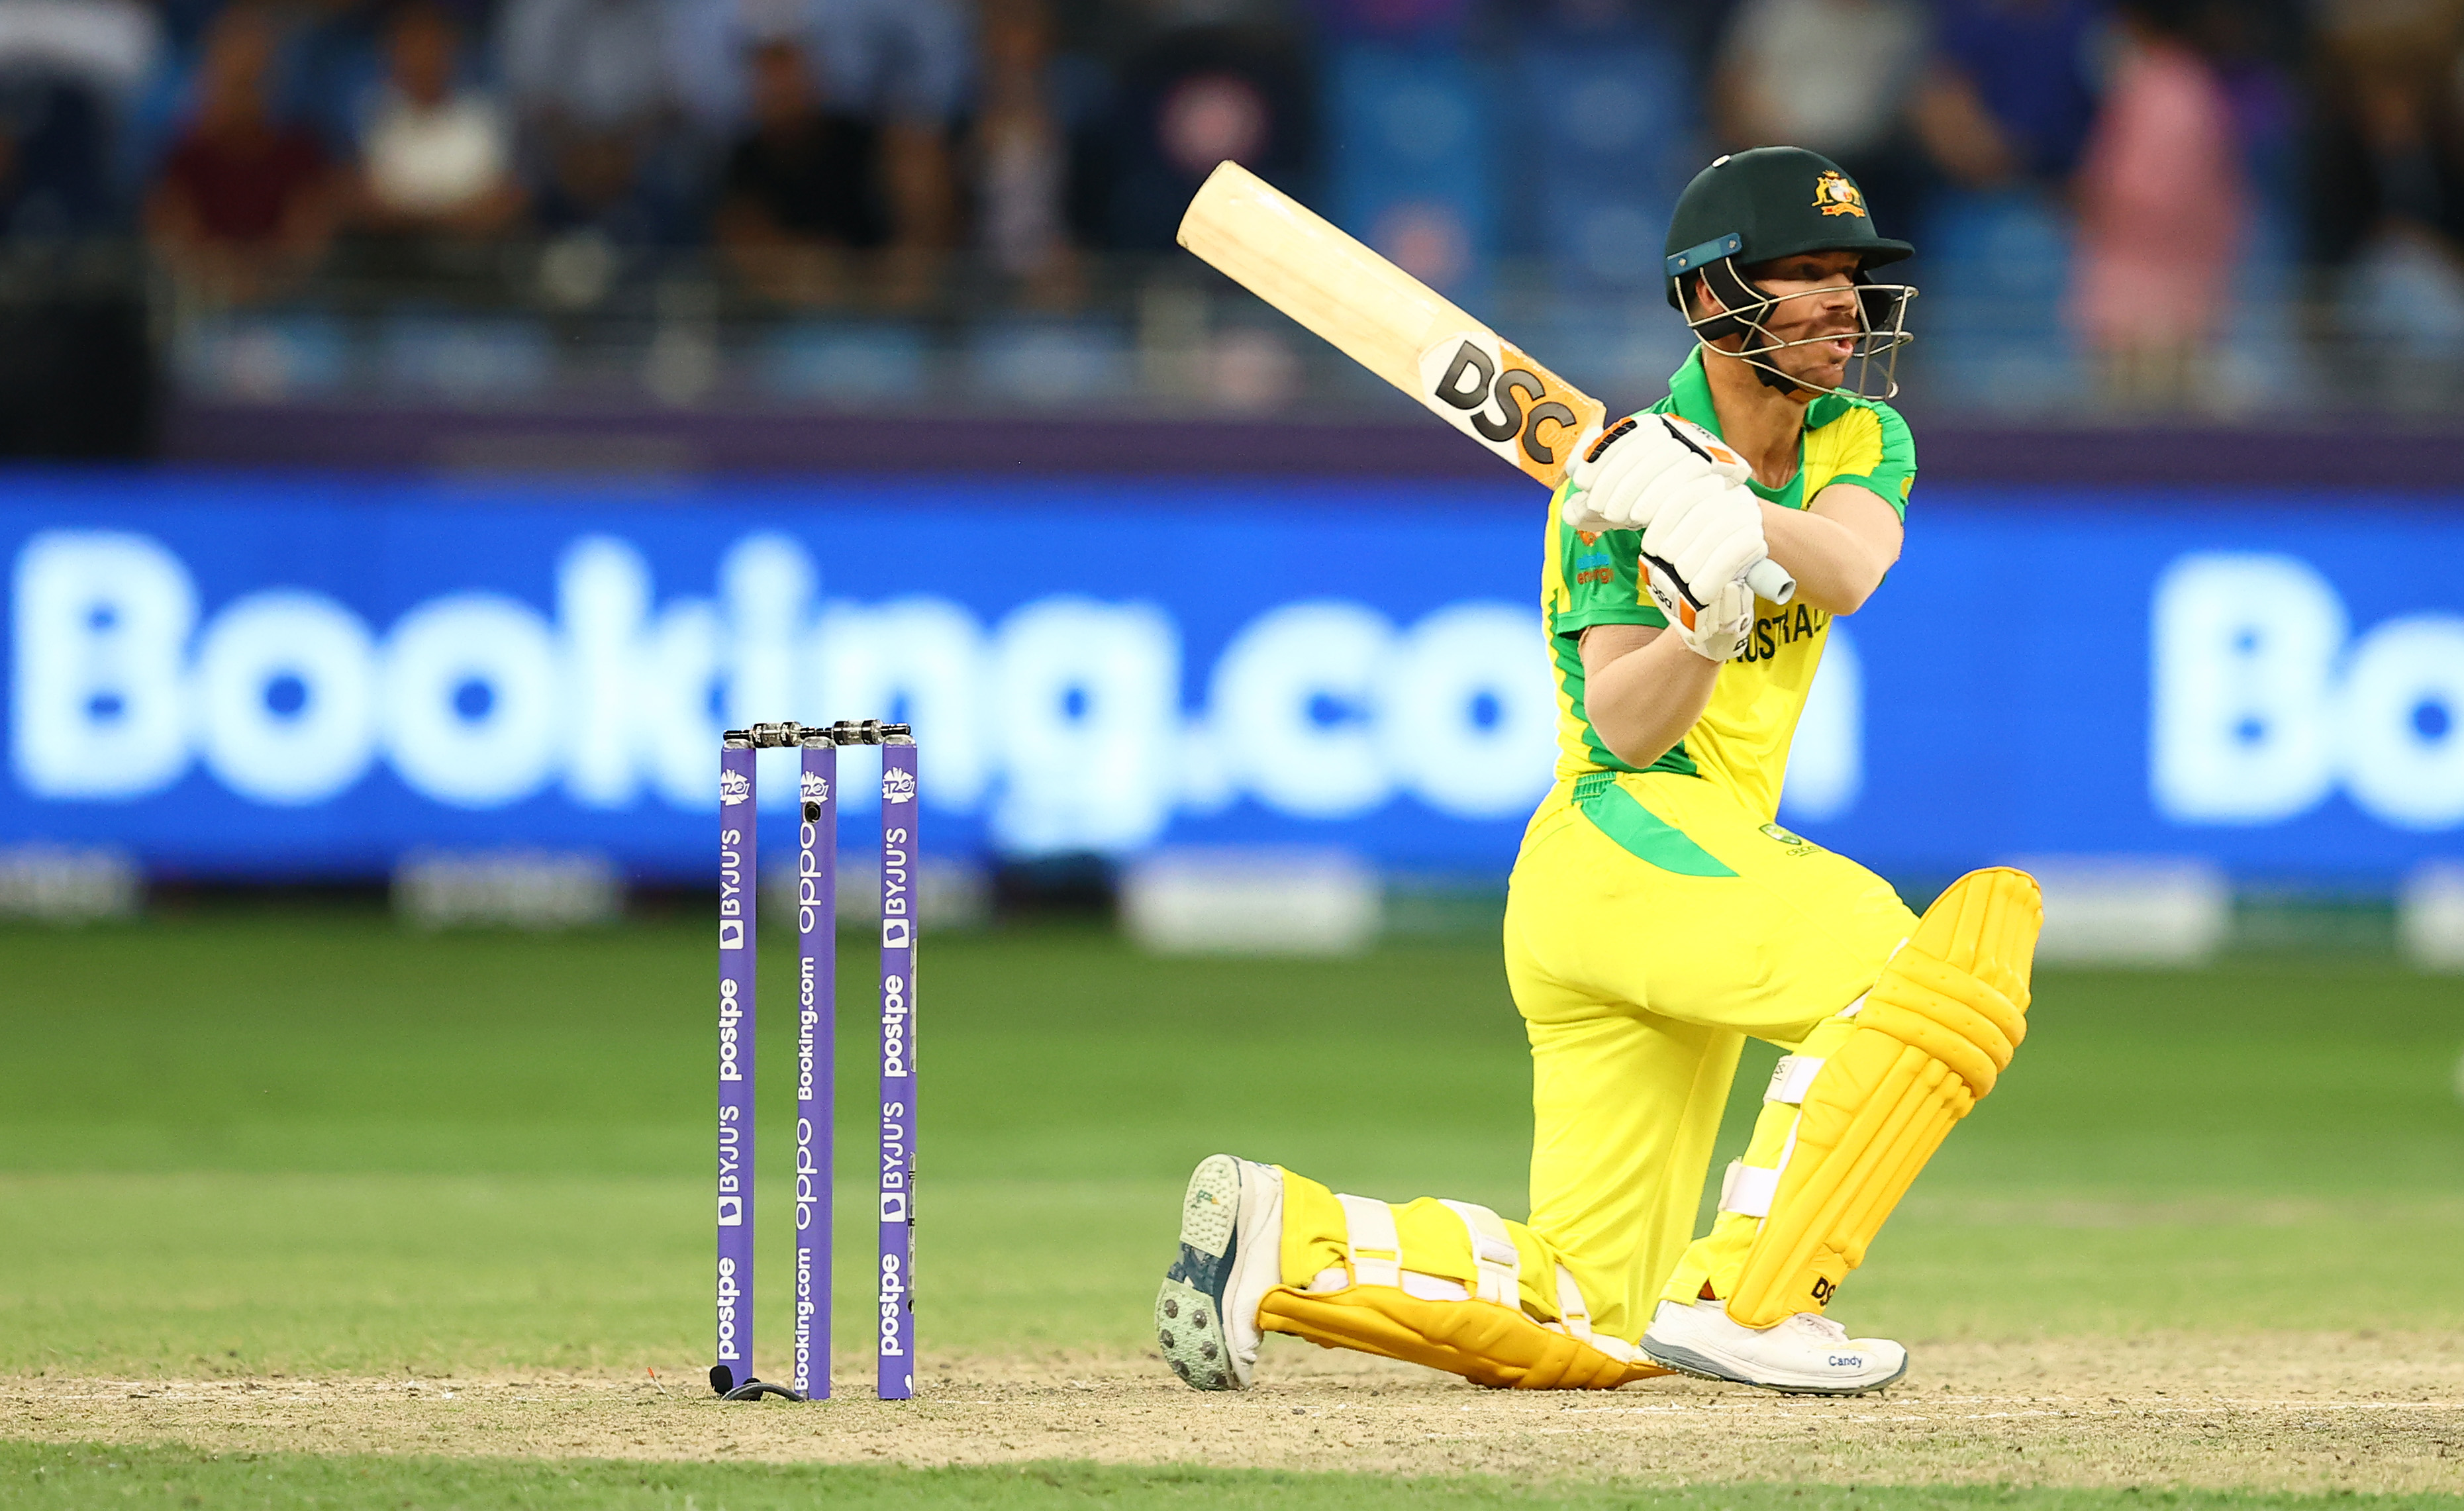 T20 World Cup 2021 Final | Definitely up there with 2015 World Cup win, says David Warner as Australia clinch maiden T20 WC